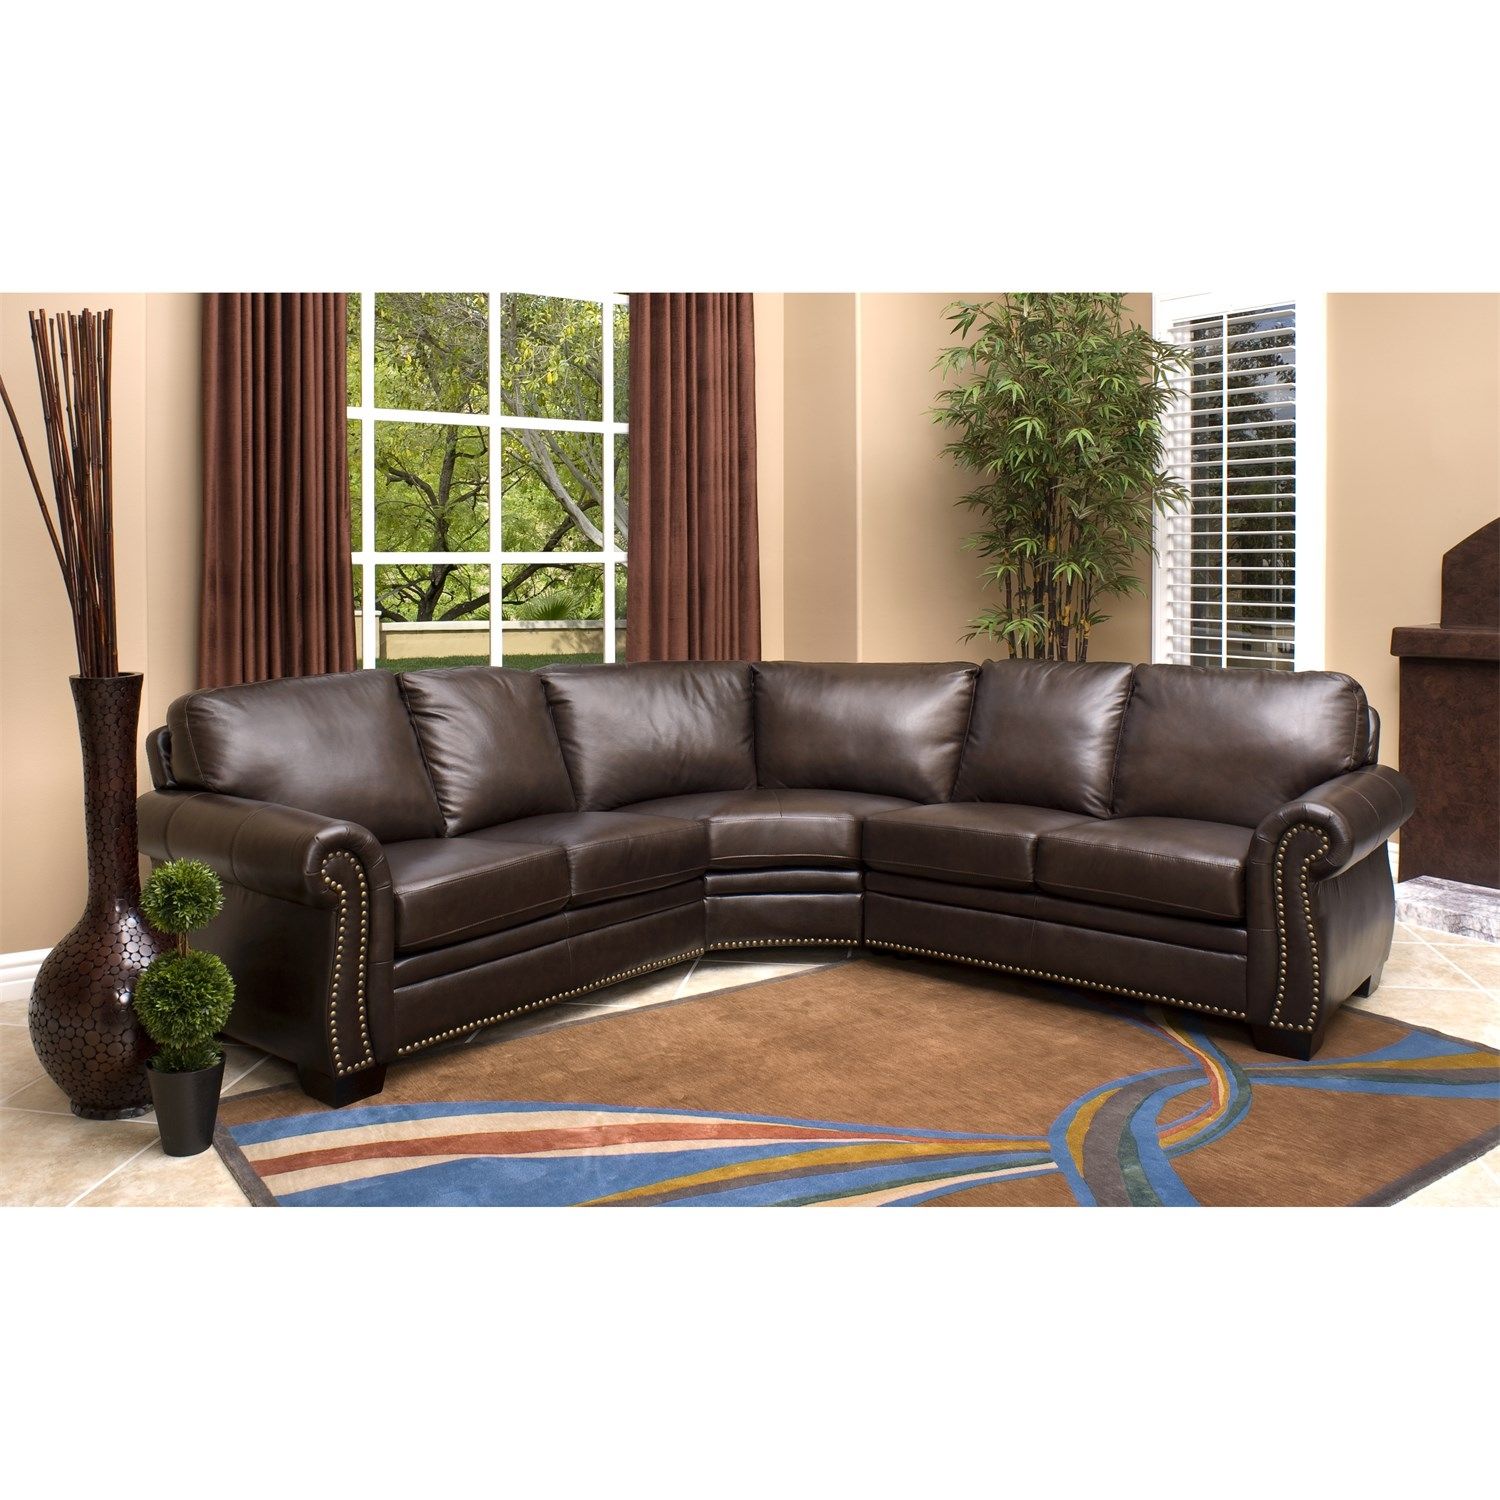 Abson Living Ci N410 Brn Oxford Italian Leather Sectional Sofa Pertaining To Abbyson Sectional Sofa (View 5 of 12)